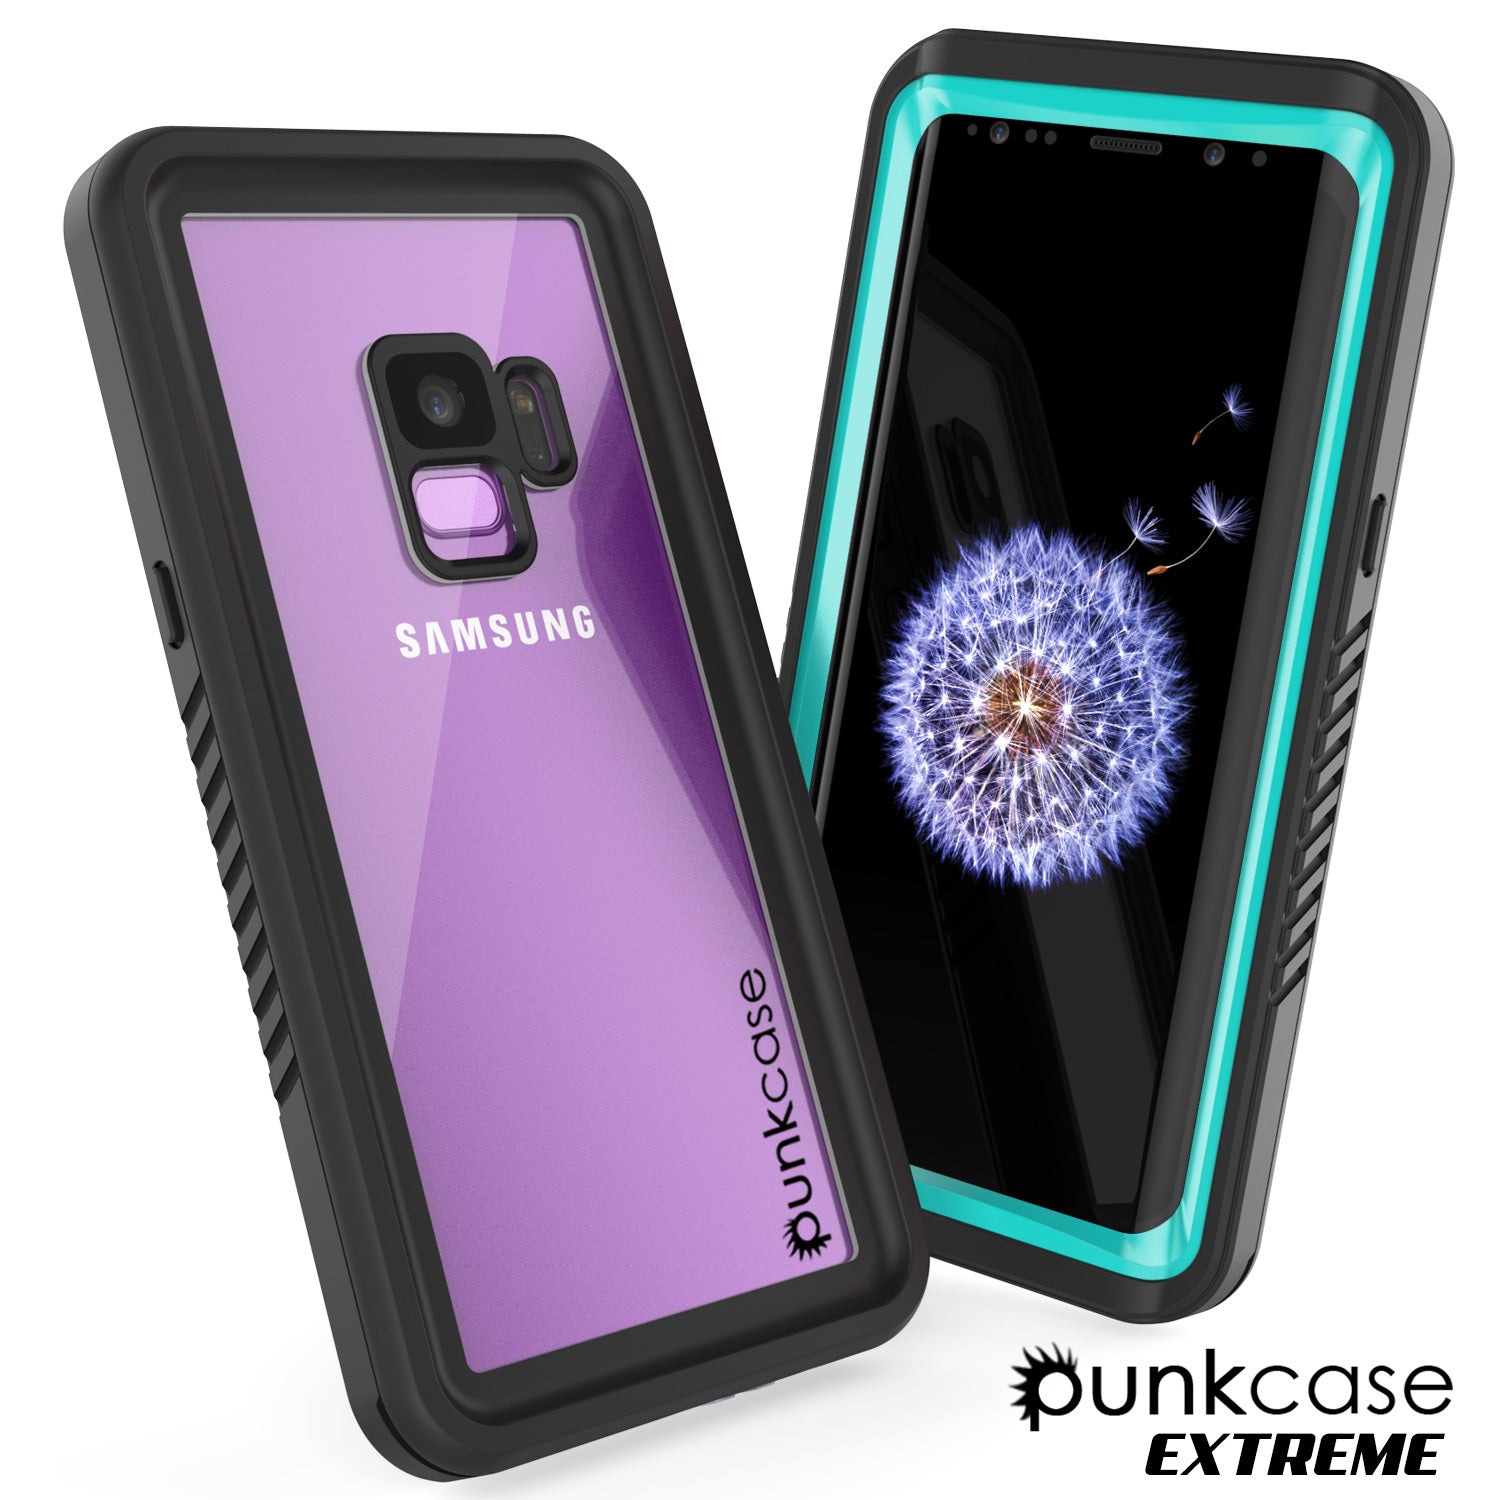 Galaxy S9 Water/Shock/Dirt proof Screen Protector Built Case [Teal]